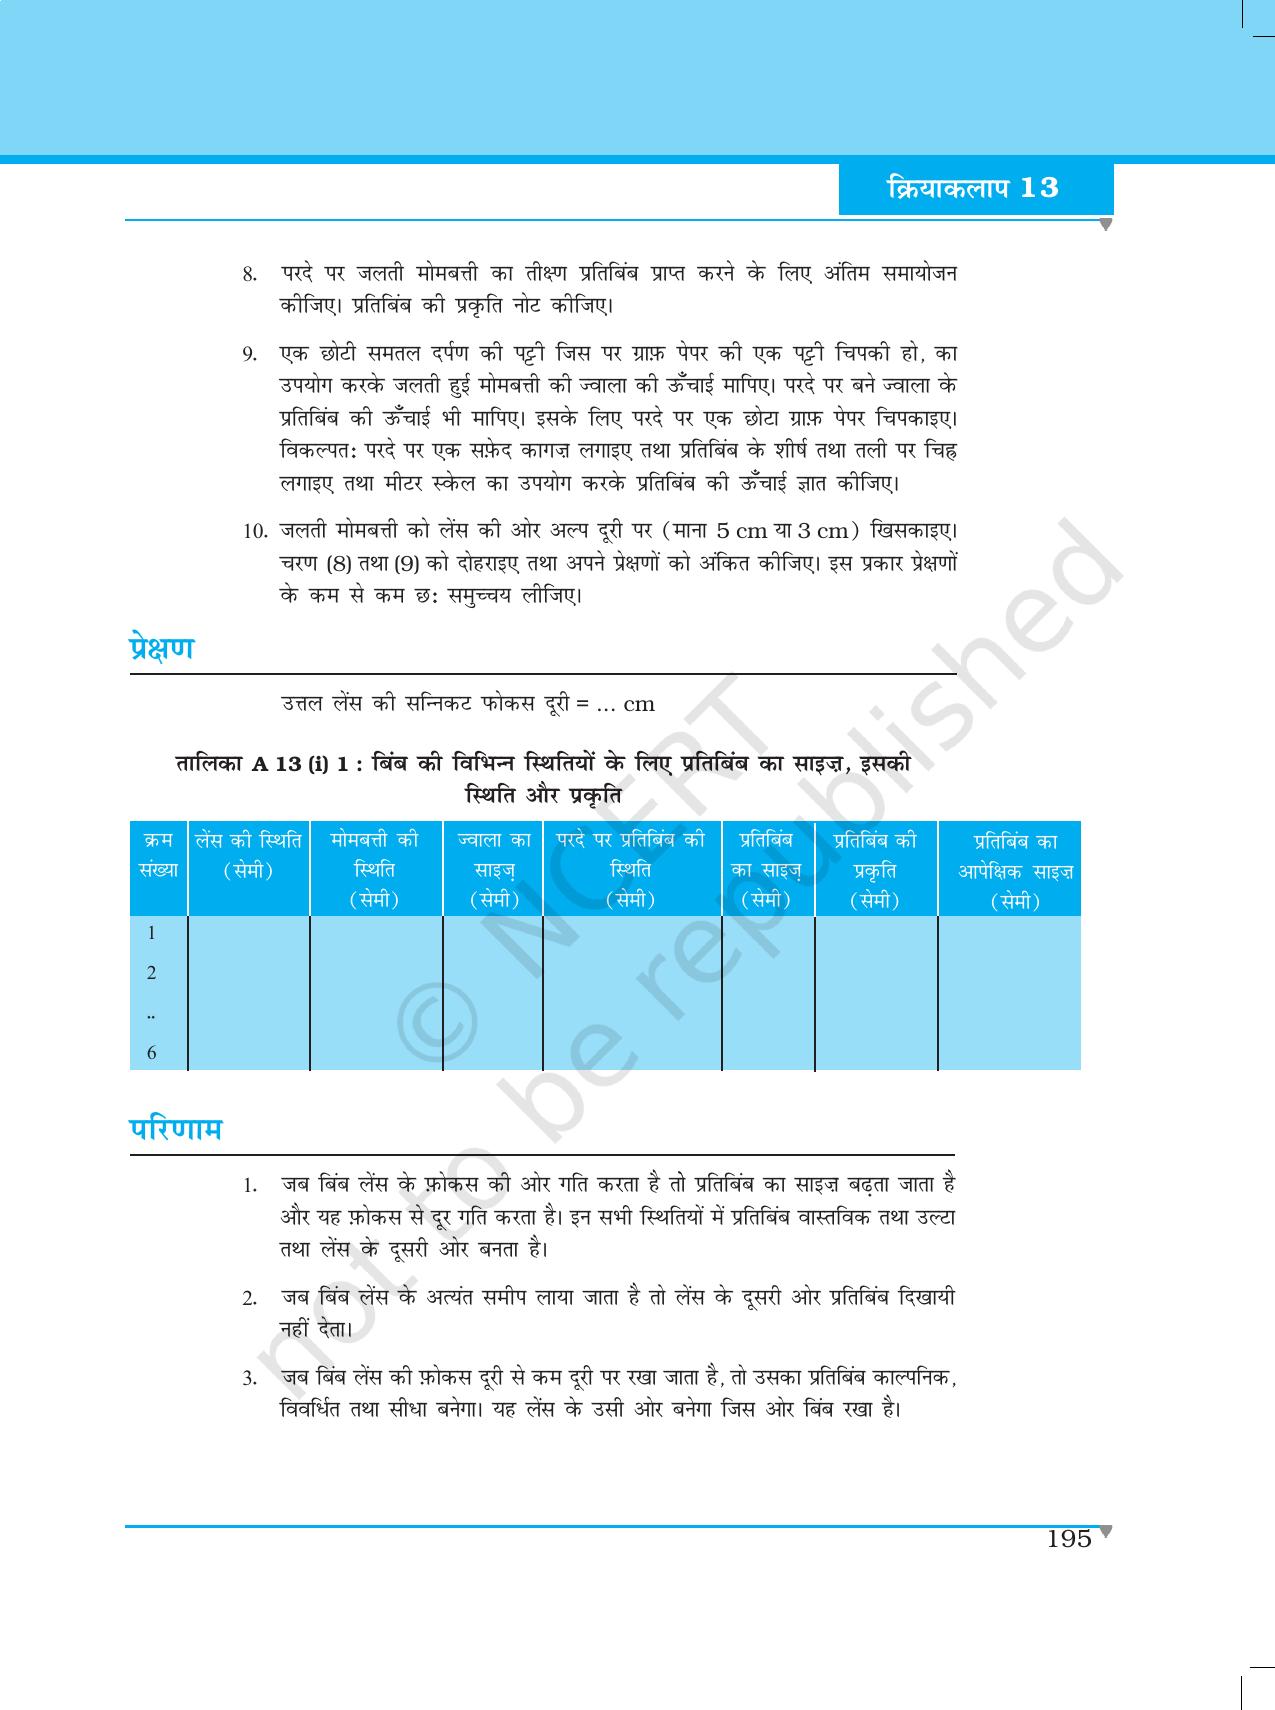 NCERT Laboratory Manuals for Class XII भौतिकी - क्रियाकलाप (12 - 14) - Page 6